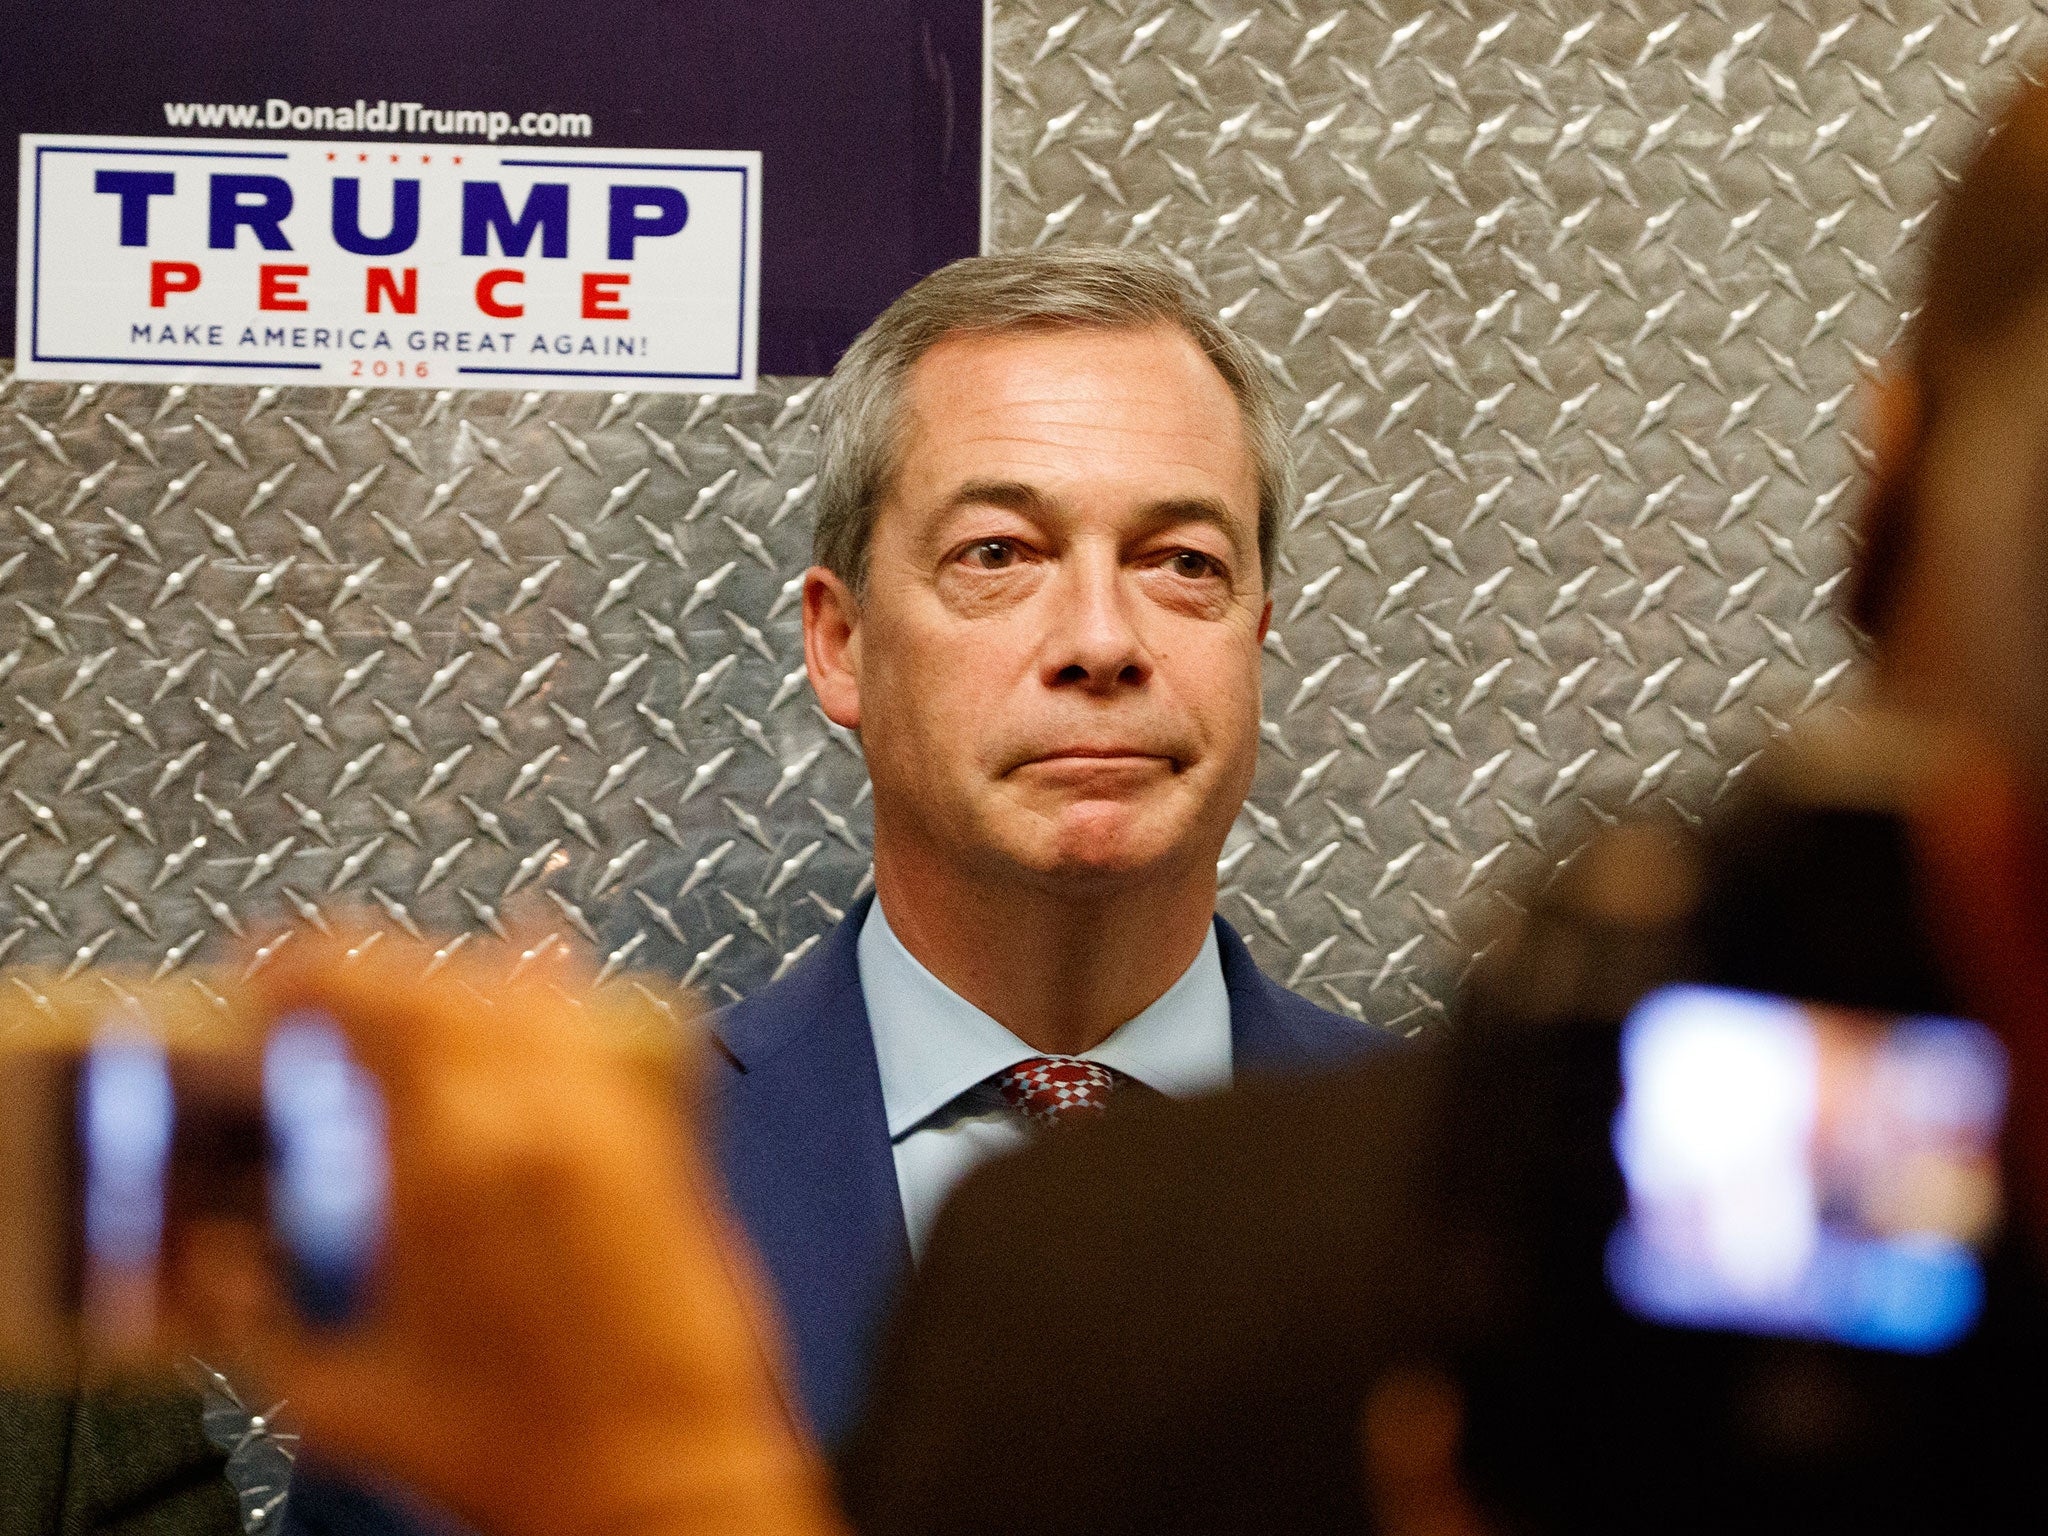 In response to the claims, Ukip interim leader Nigel Farage said his party was being ‘victimised’